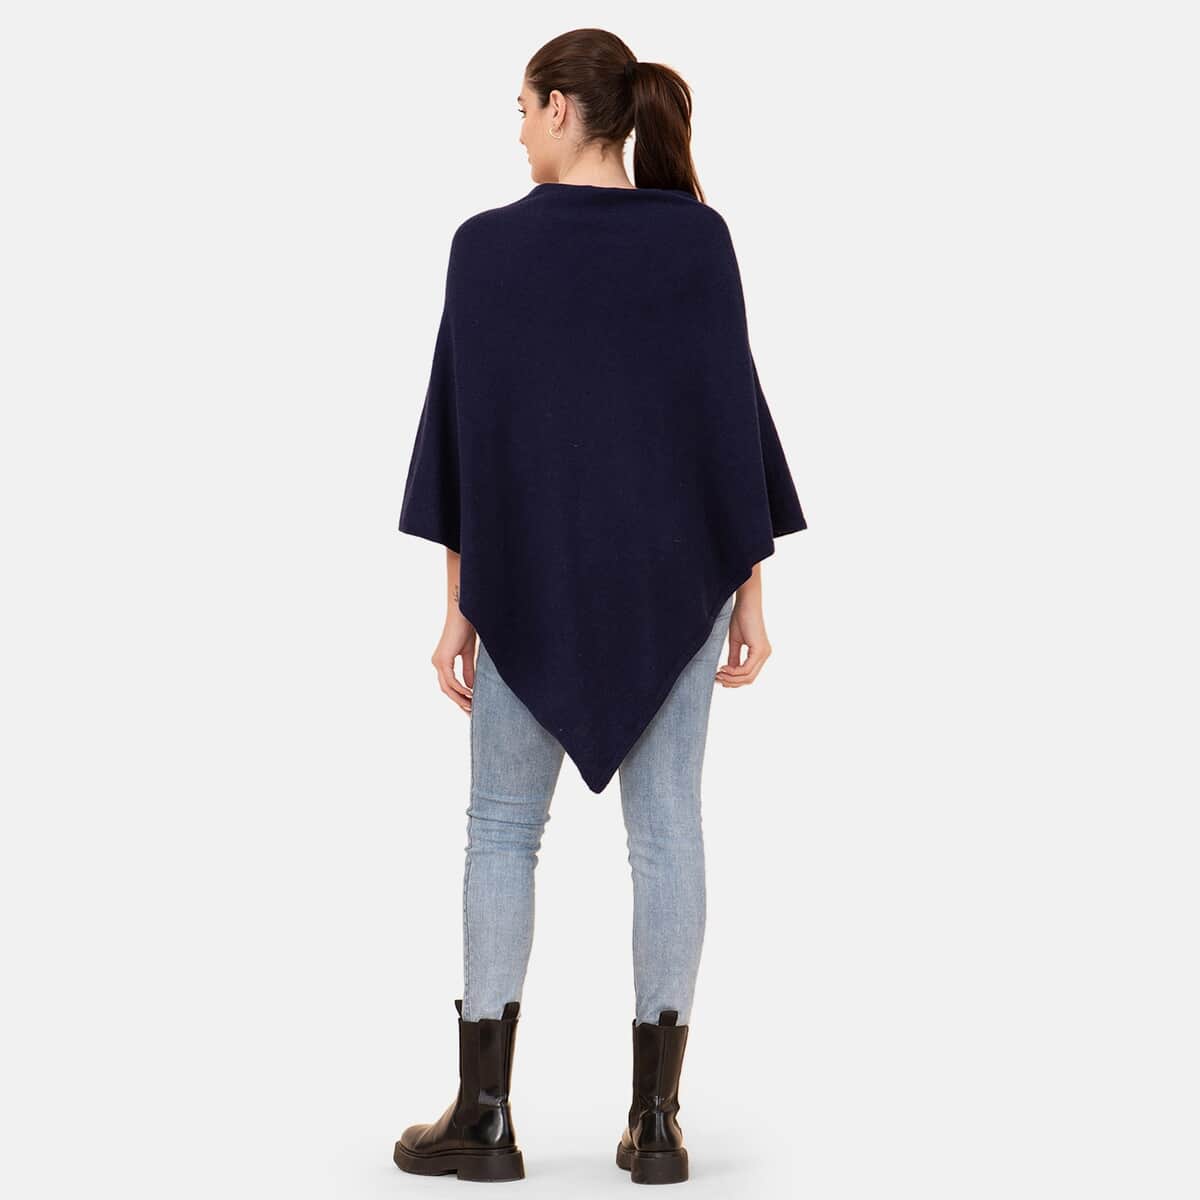 LA MAREY Cashmere Wool Black Poncho (One Size Fits Most, 28"x28") image number 1